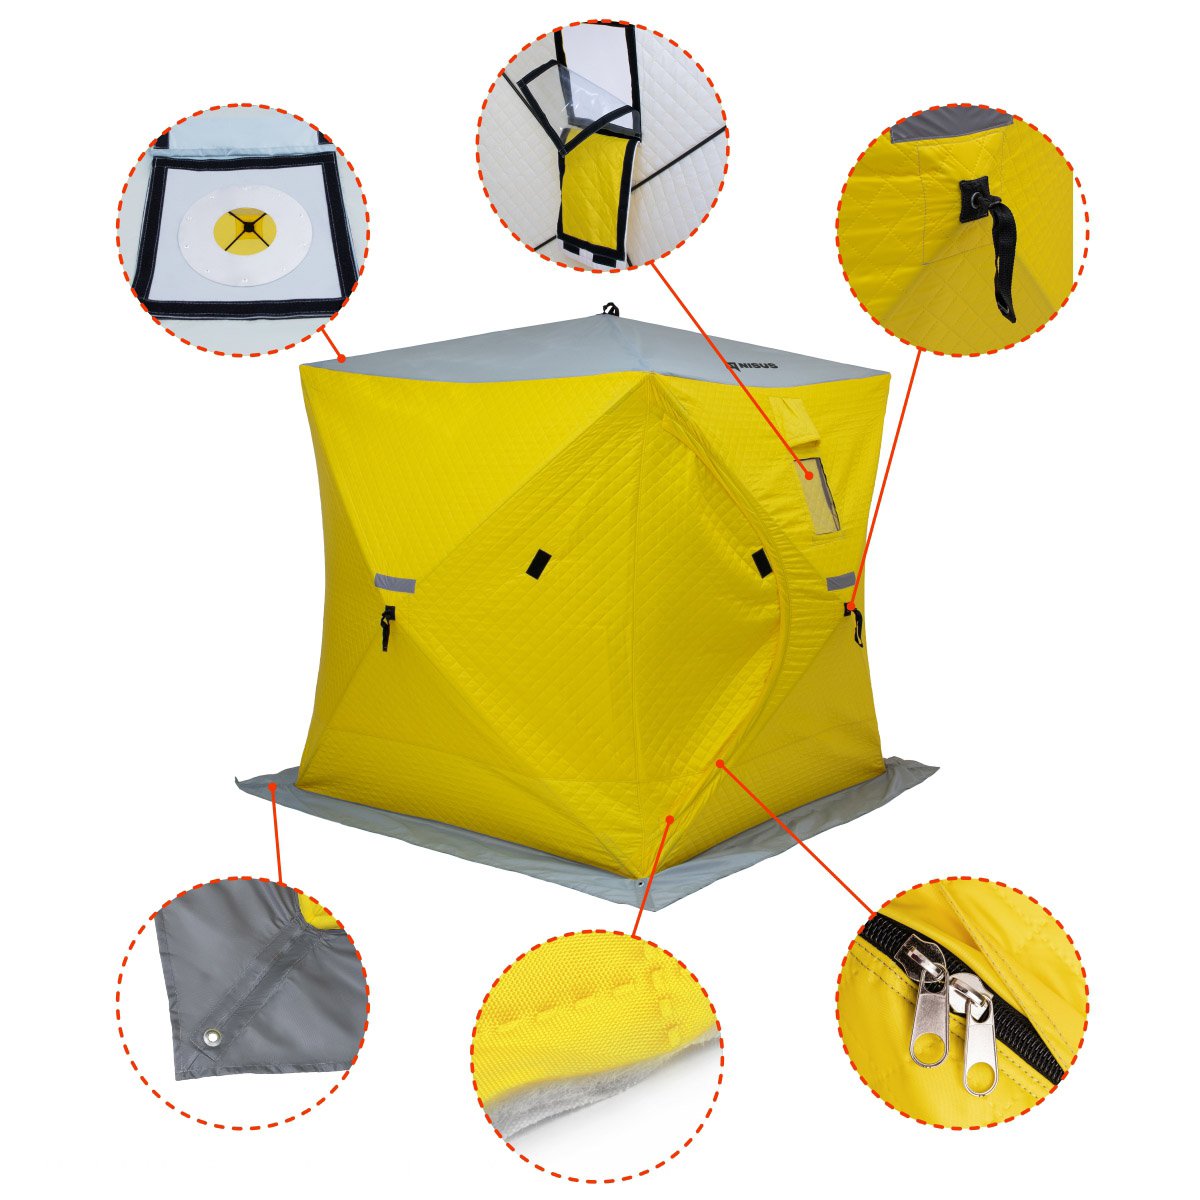 Cube Insulated Ice Fishing Shelter for two persons is equipped with an extra wide protective skirt with apertures for ice anchors to fix the shelter, windows for ventilation, solid fiberglass frame and zippers to widely open/close the shelter. Insulated with Taffeta 190 and Arctic 80 thermal fabric. 